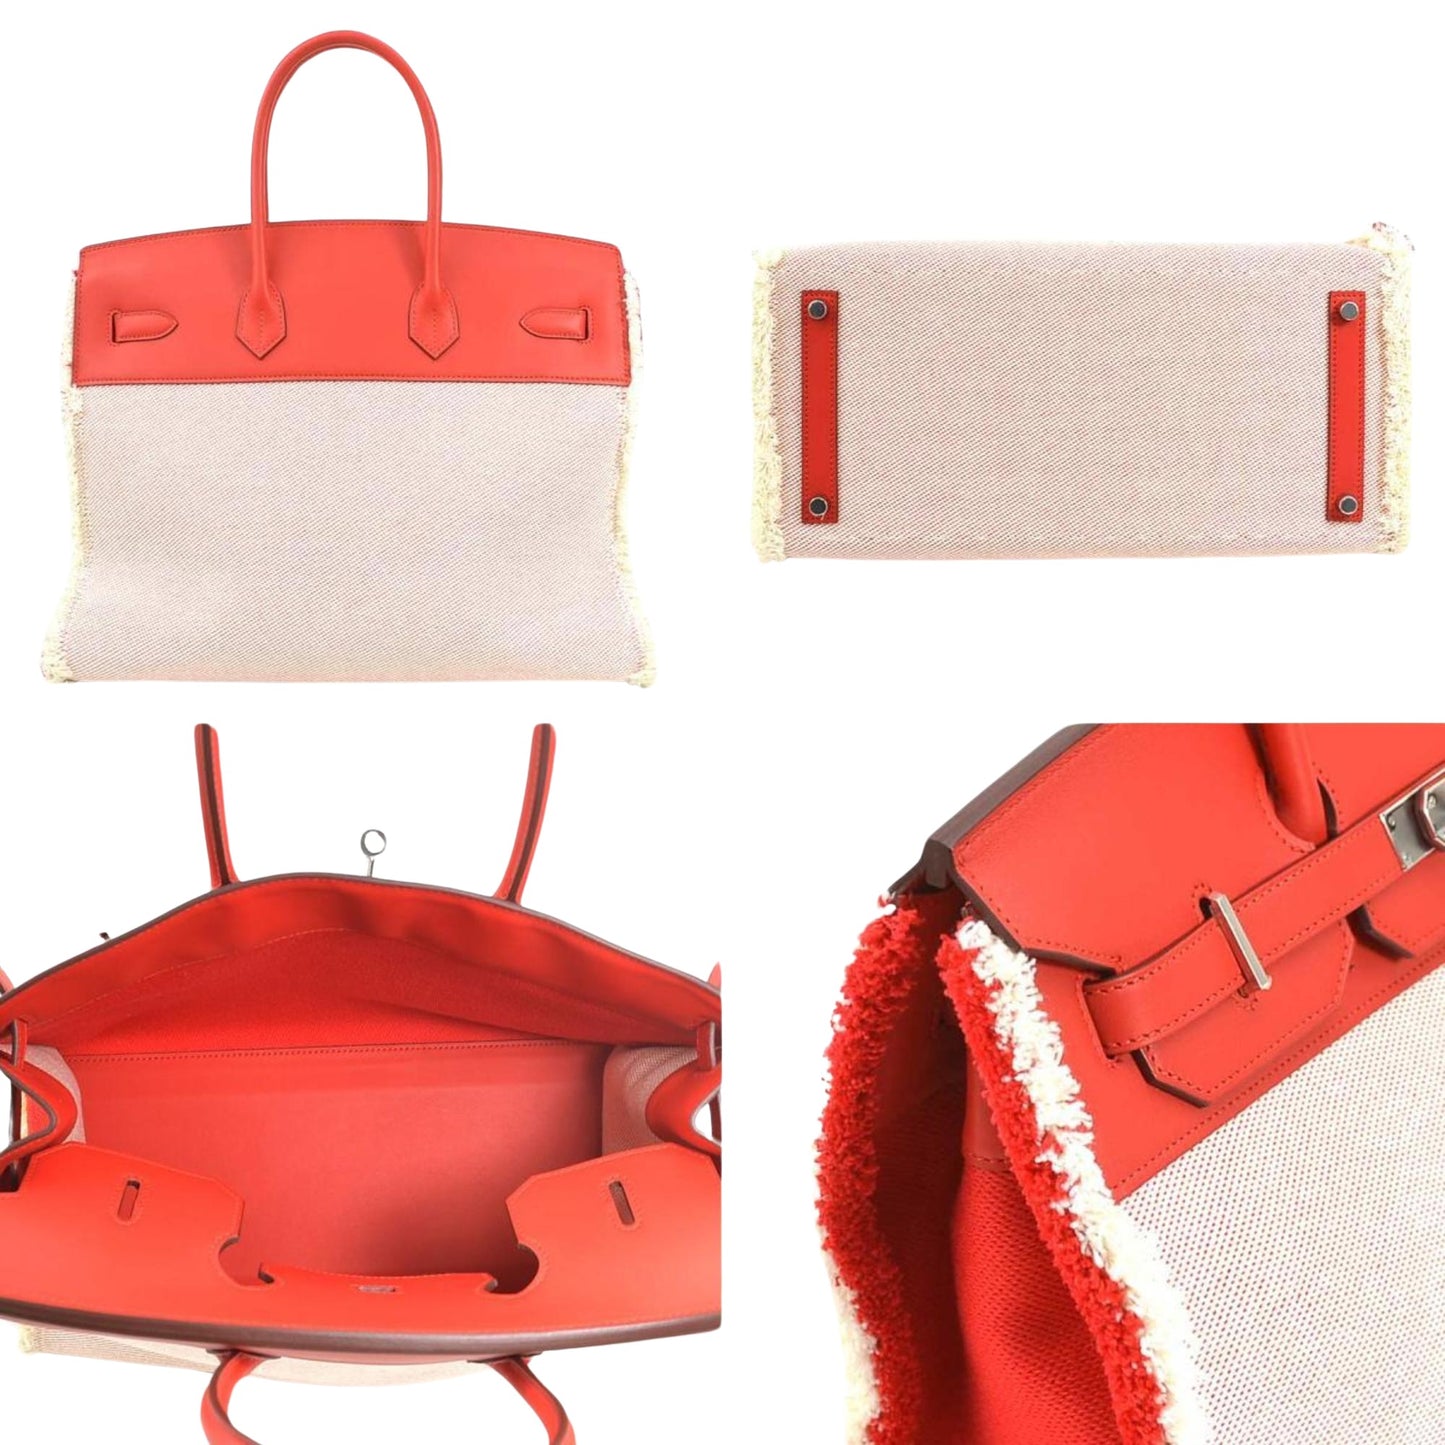 Hermes Women's Sophisticated Leather Handbag with Silver Hardware in Red